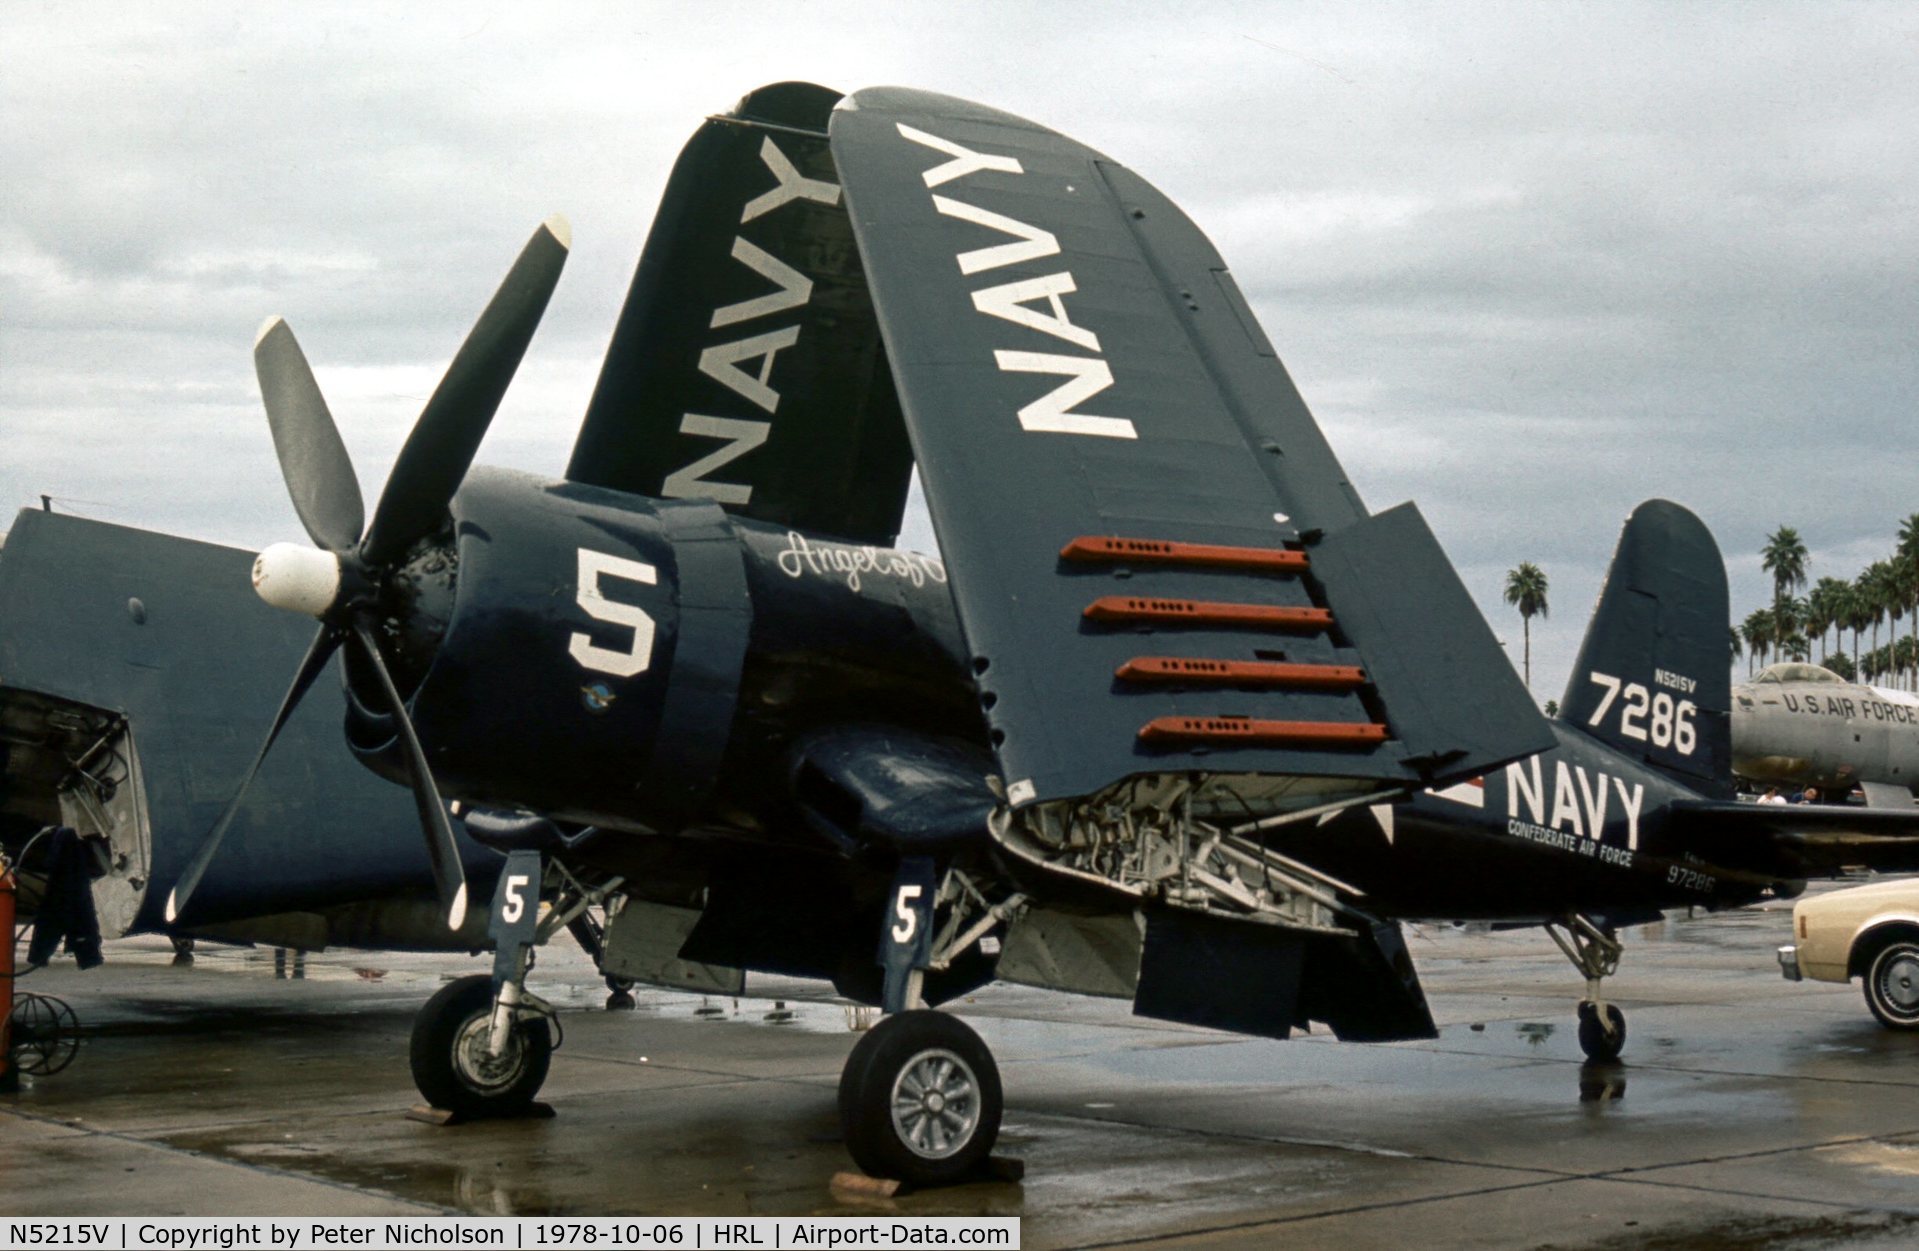 N5215V, 1945 Vought F4U-4 Corsair C/N 9440, This Corsair, Bu 97286,  was displayed by the Confederate Air Force at the 1978 Airshow at Harlingen